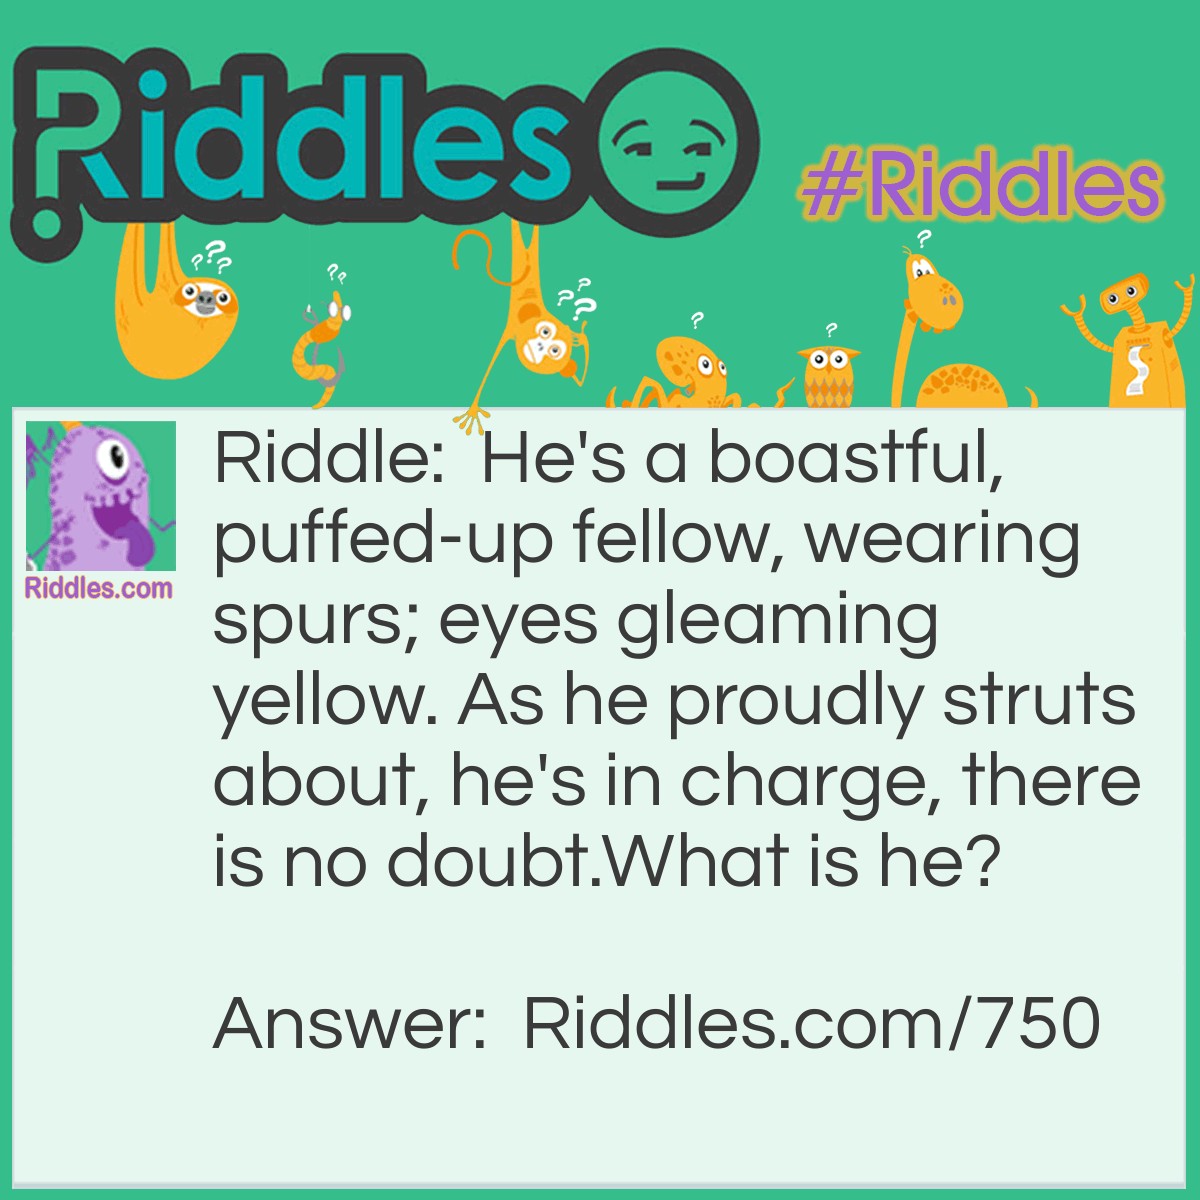 Riddle: He's a boastful, puffed-up fellow, wearing spurs; eyes gleaming yellow. As he proudly struts about, he's in charge, there is no doubt.
What is he? Answer: He is a Rooster.